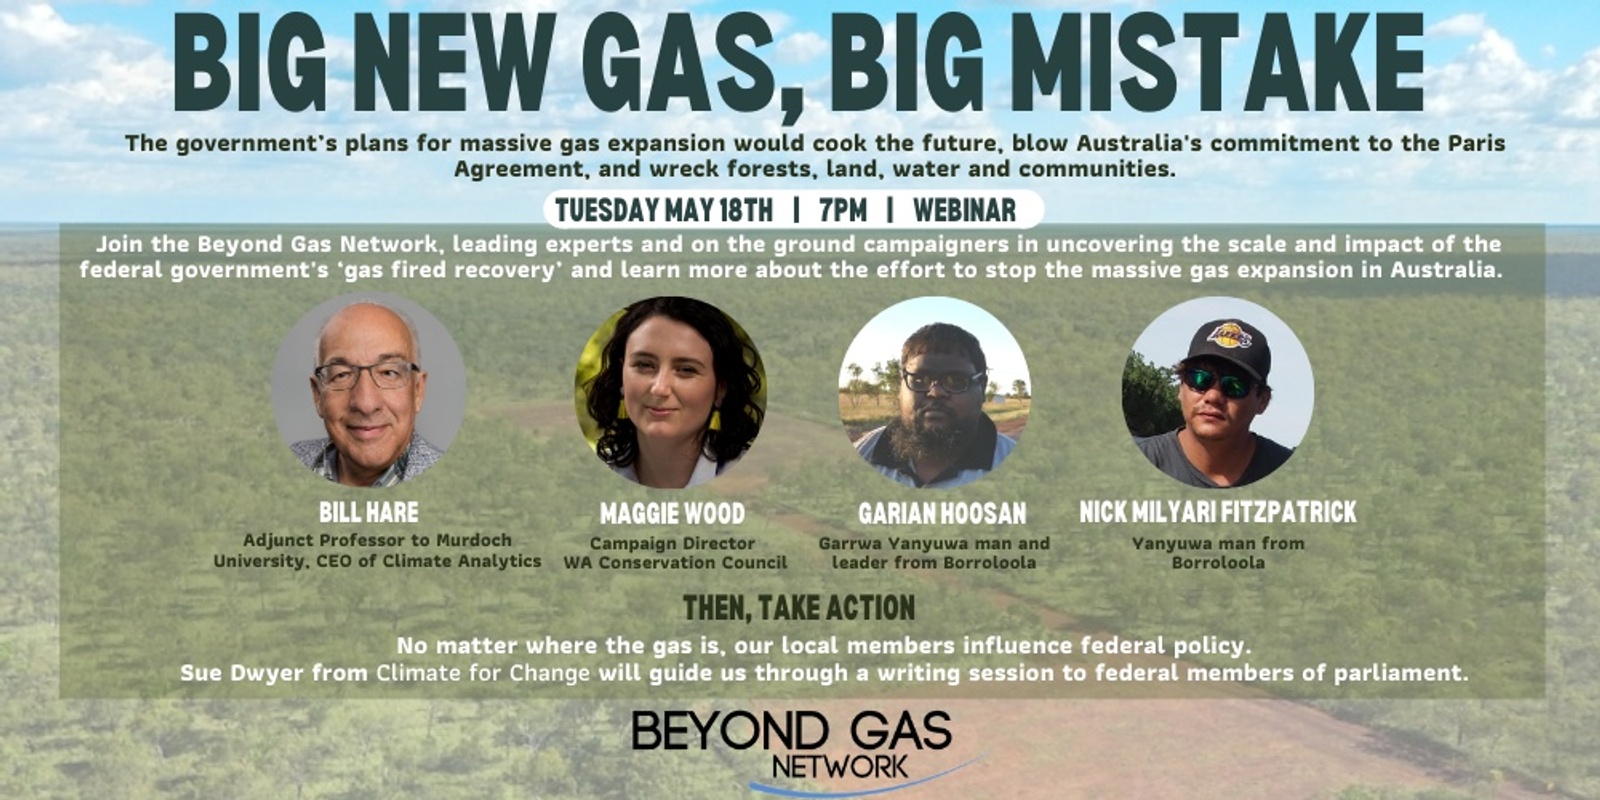 BIG NEW GAS, BIG MISTAKE: the government’s plans for massive gas expansion would cook the future, blow Australia's commitment to the Paris Agreement, and wreck forests, land, water and communities